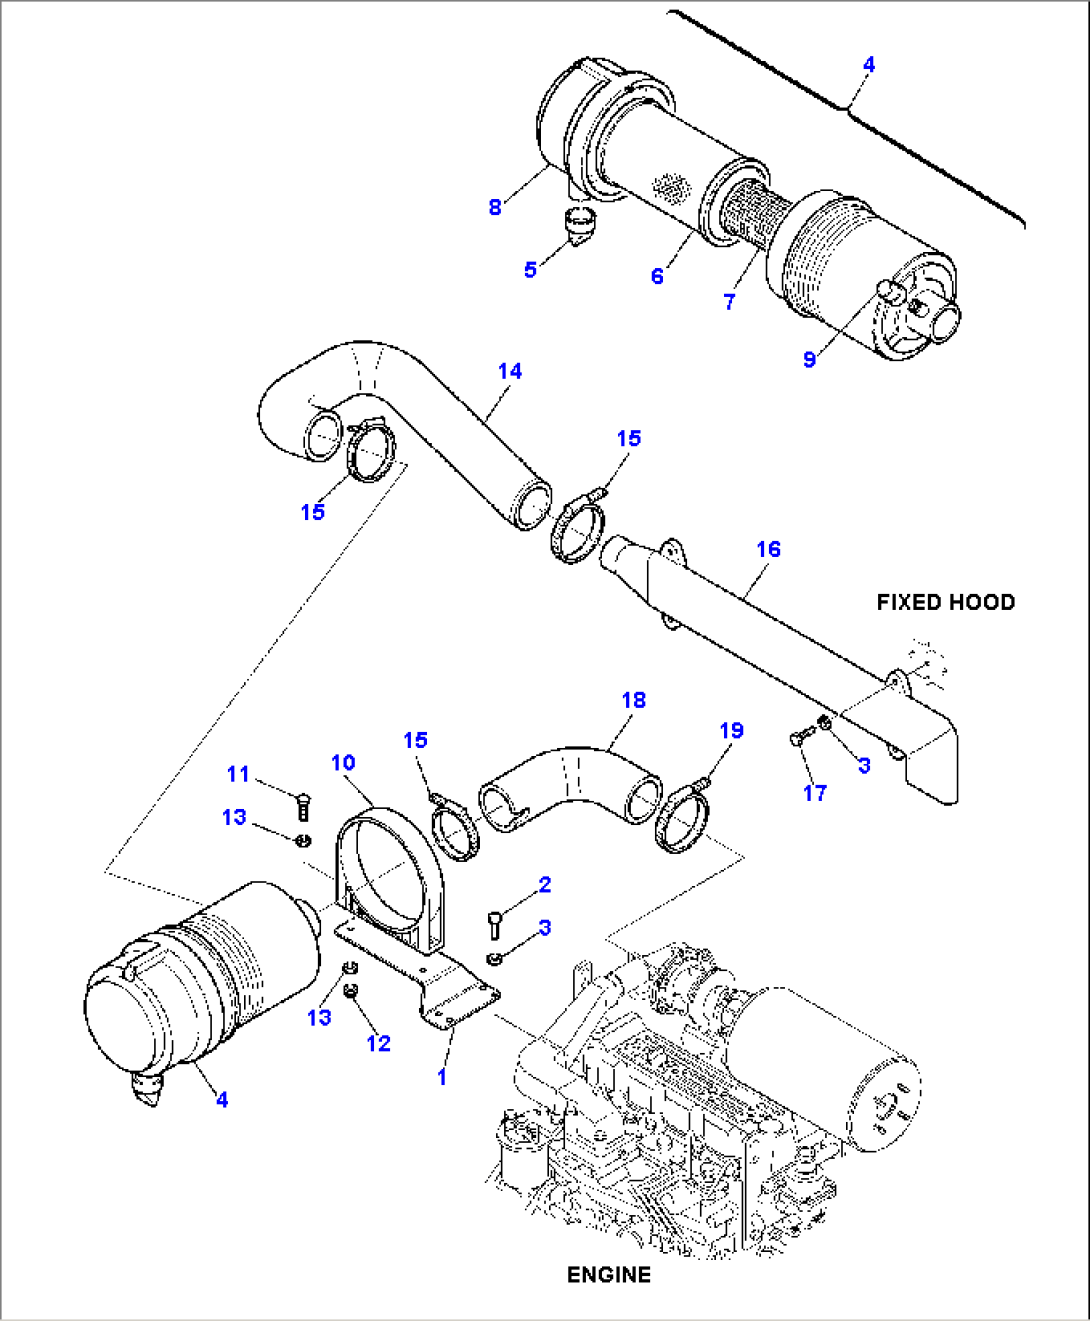 AIR CLEANER AND MOUNTING